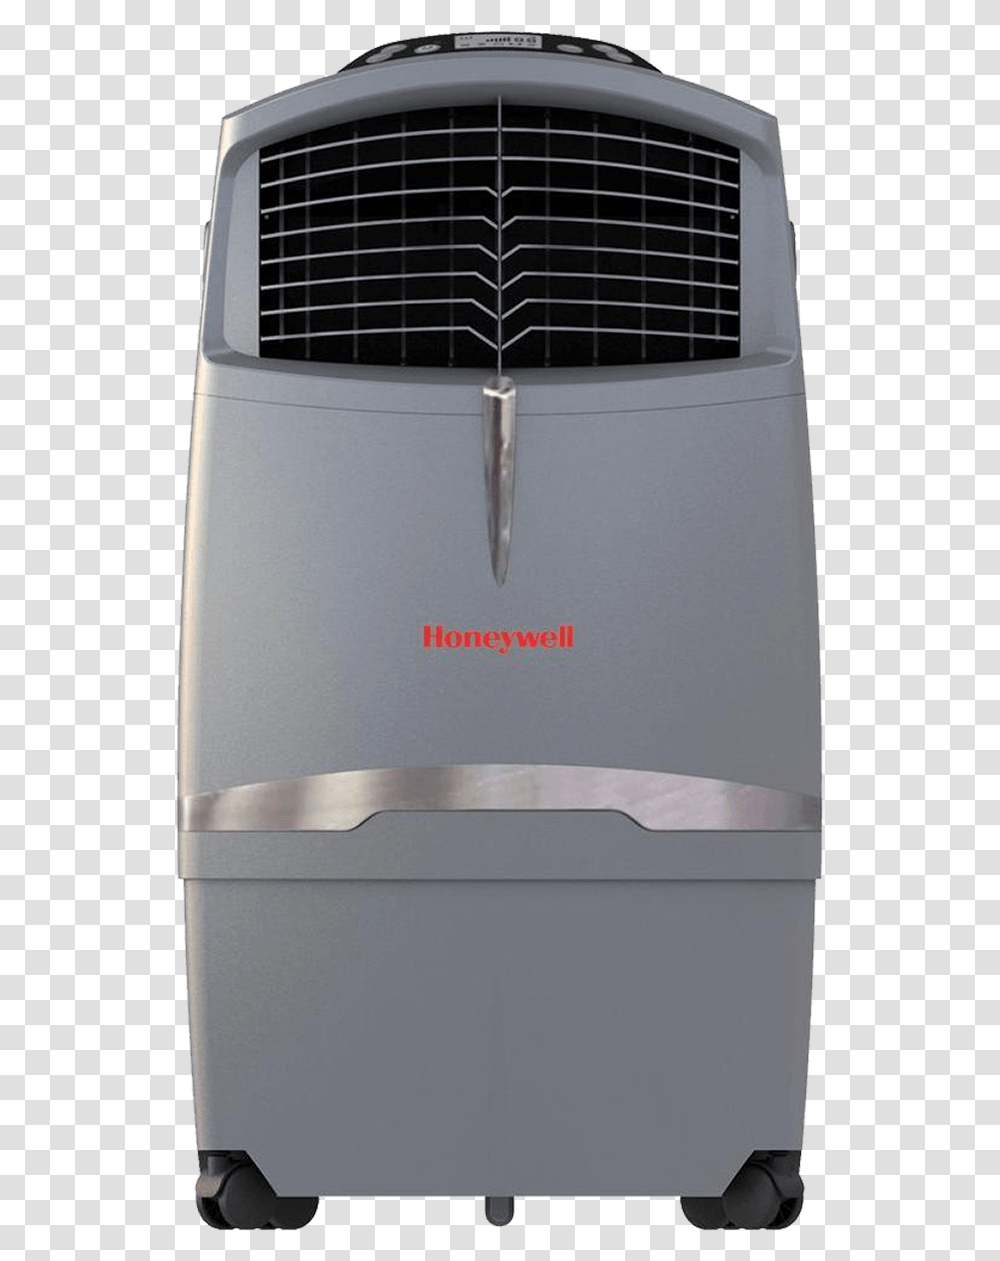 Evaporative Air Cooler Background Honeywell Air Cooler, Appliance, Air Conditioner Transparent Png